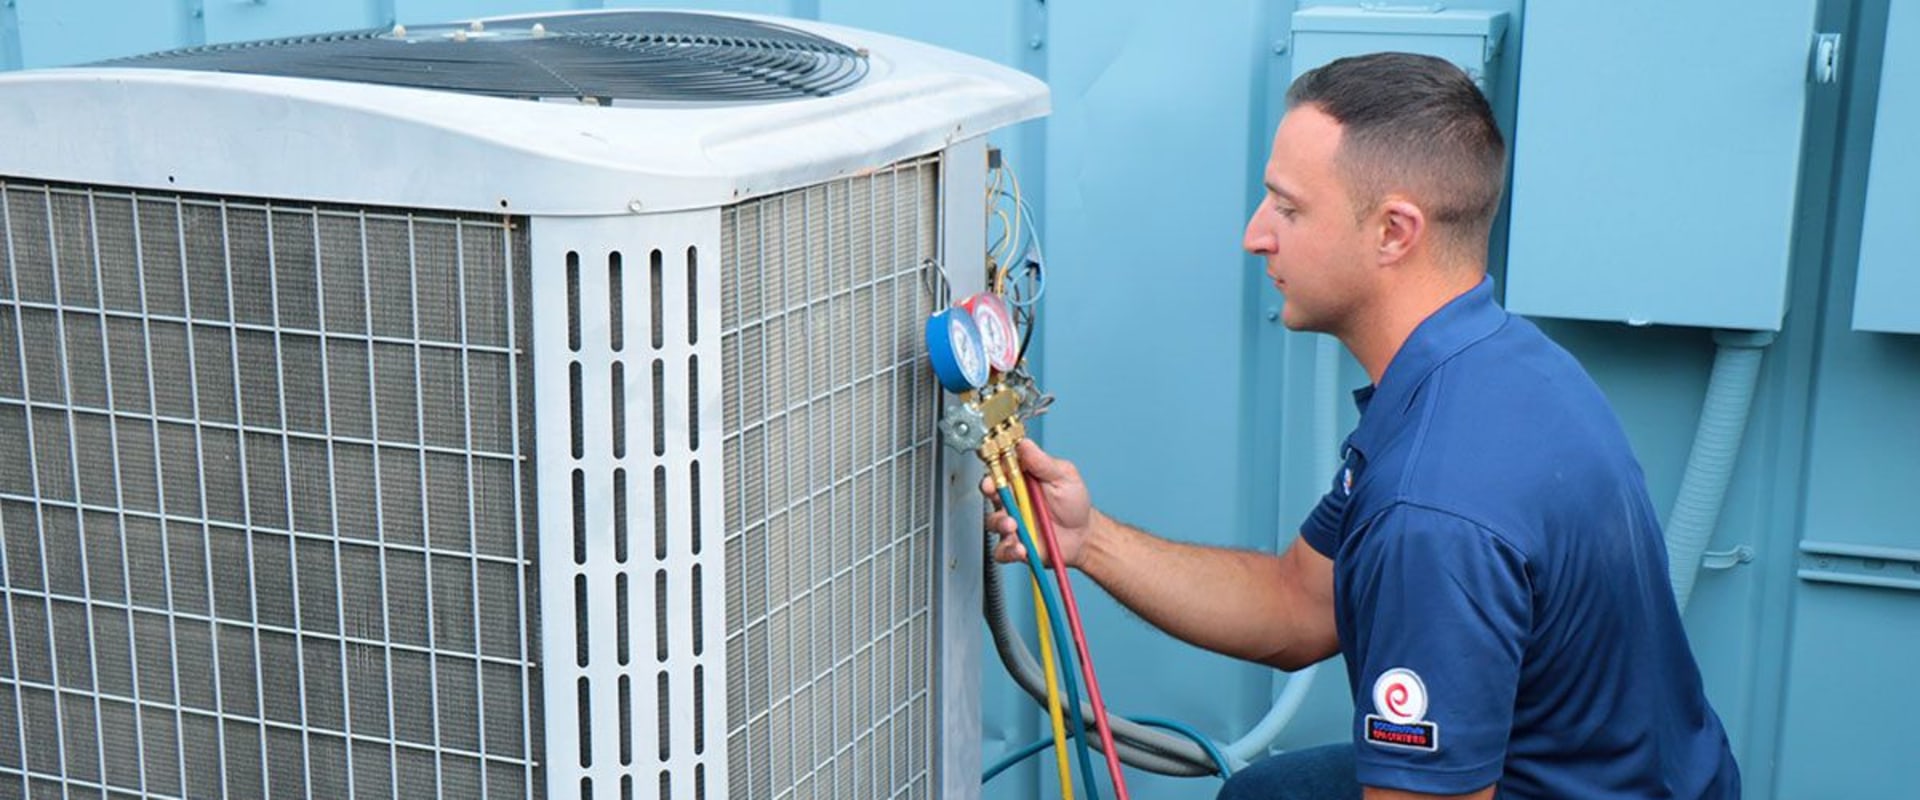 Top-notch HVAC Air Conditioning Replacement Services in Palm Beach Gardens FL